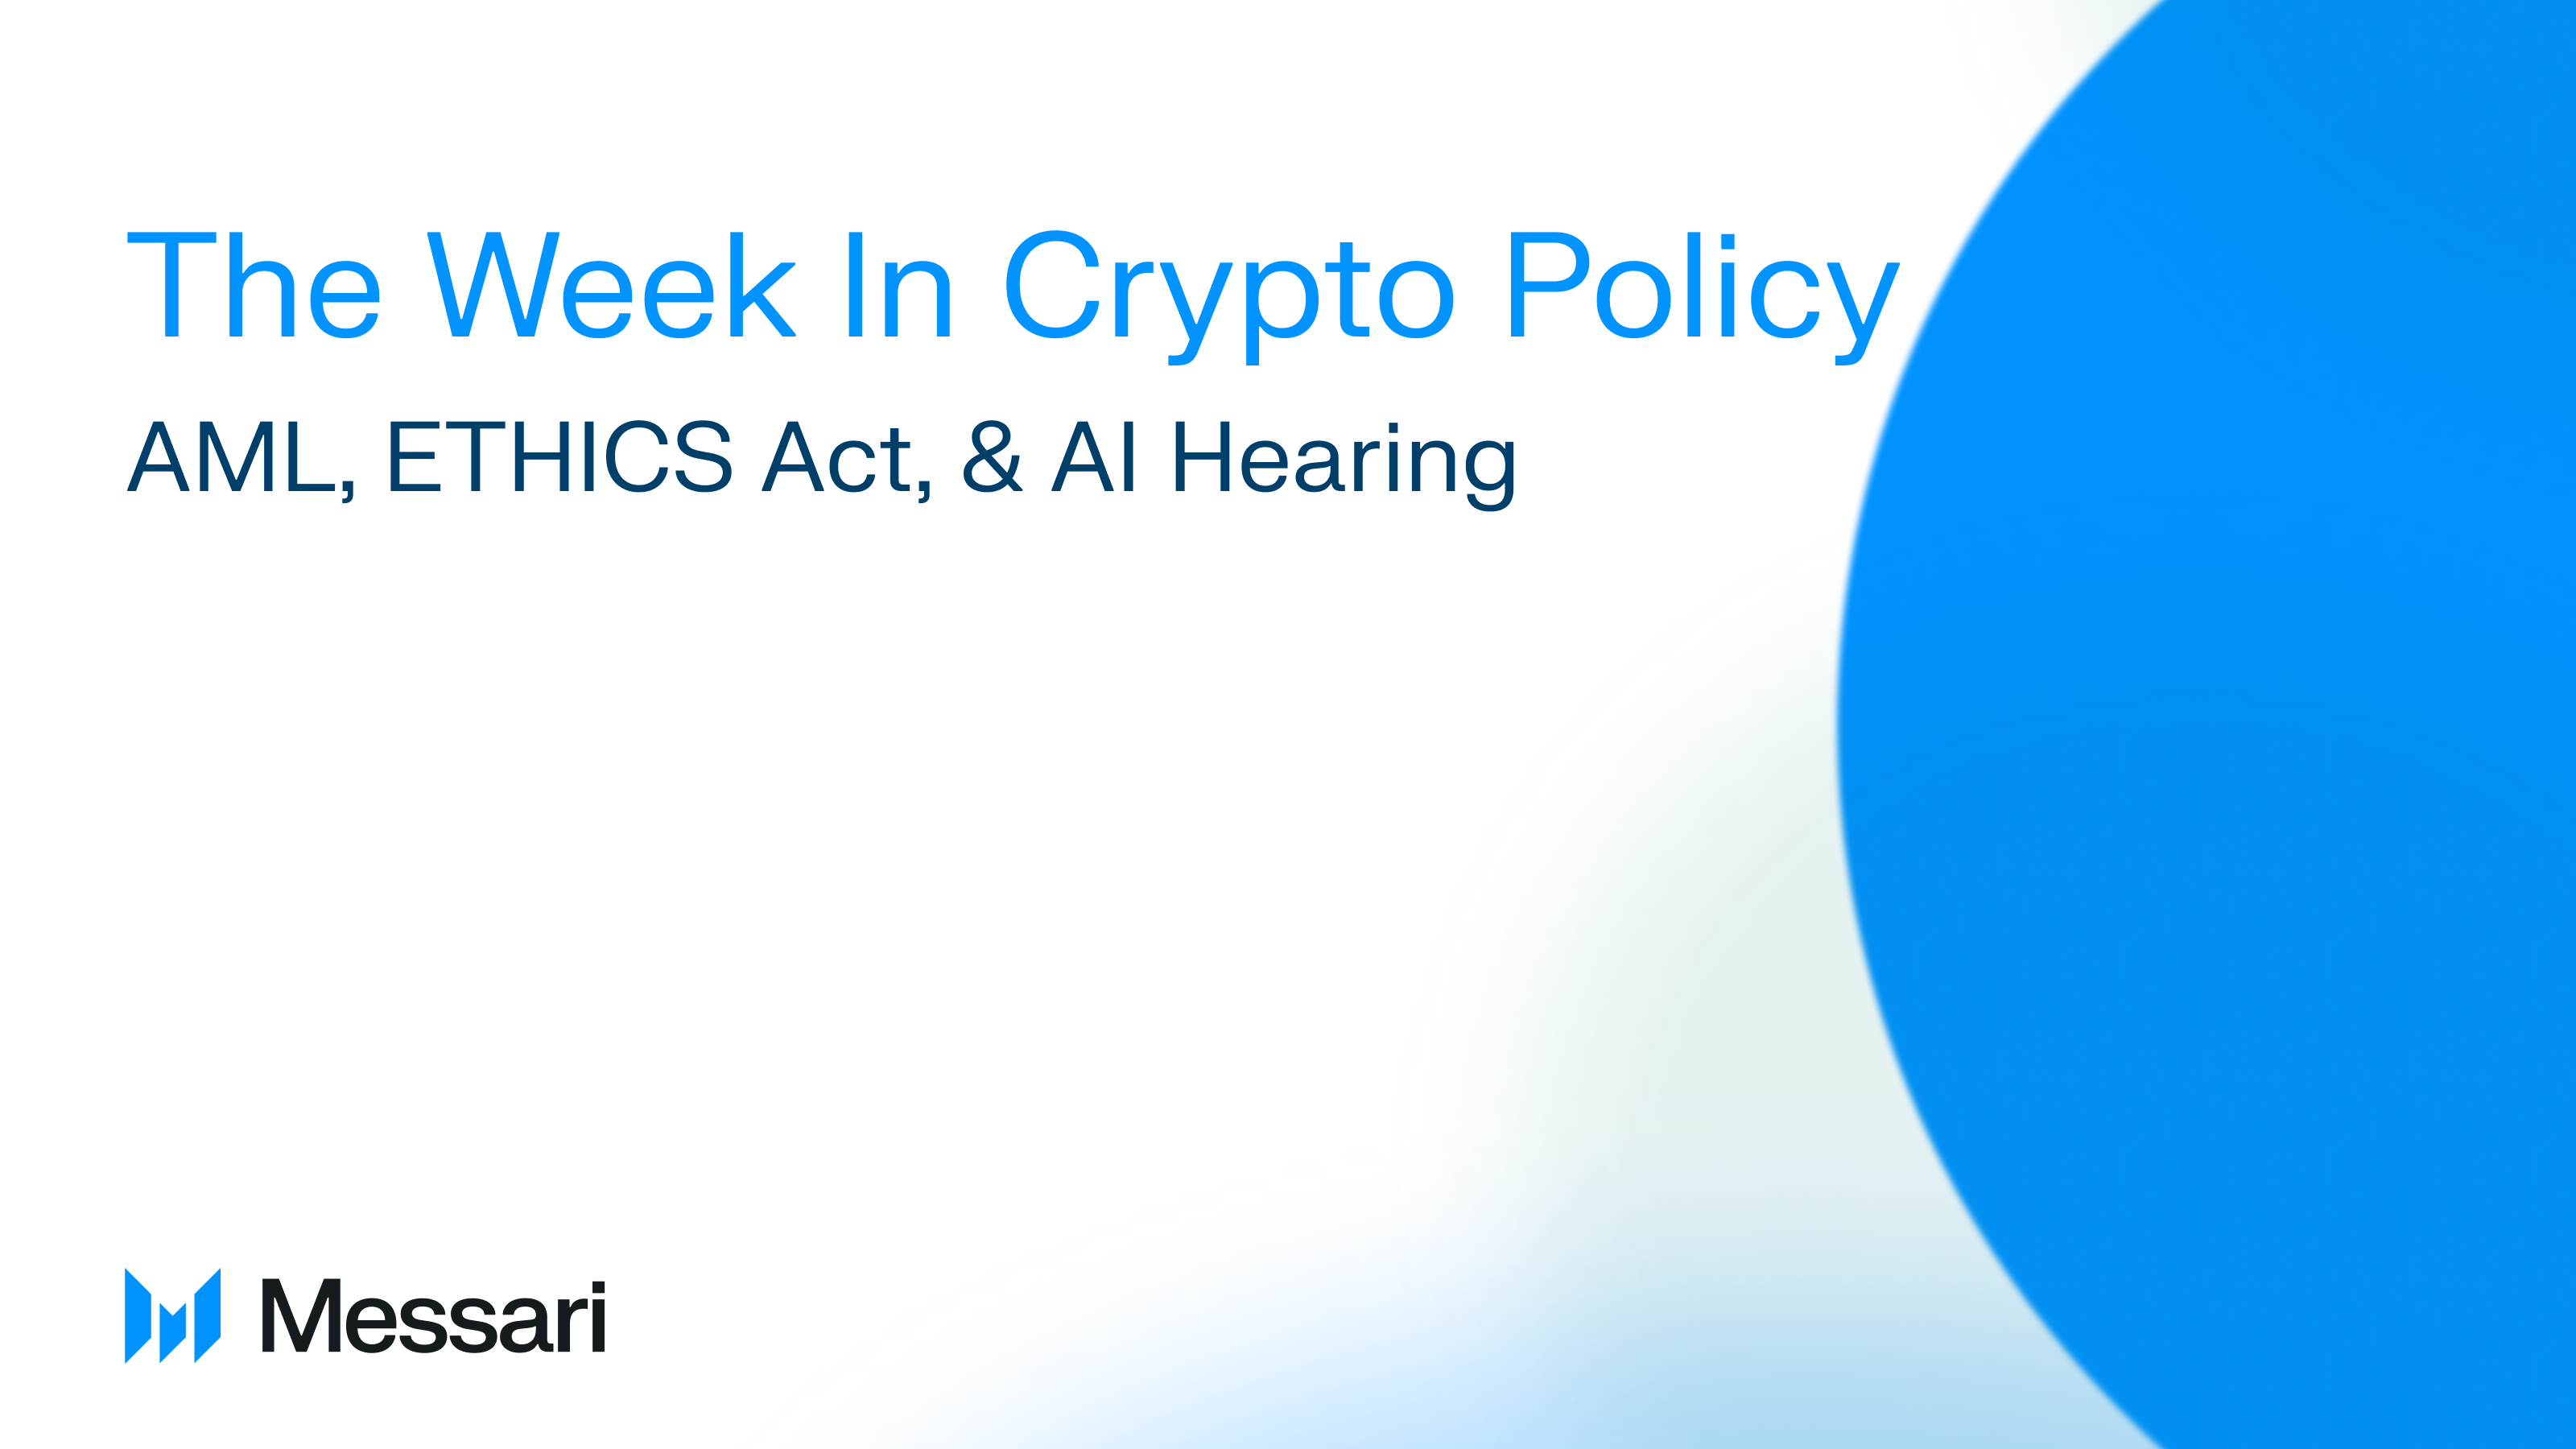 The Week of Crypto Policy: AML, ETHICS Act, & AI Hearing